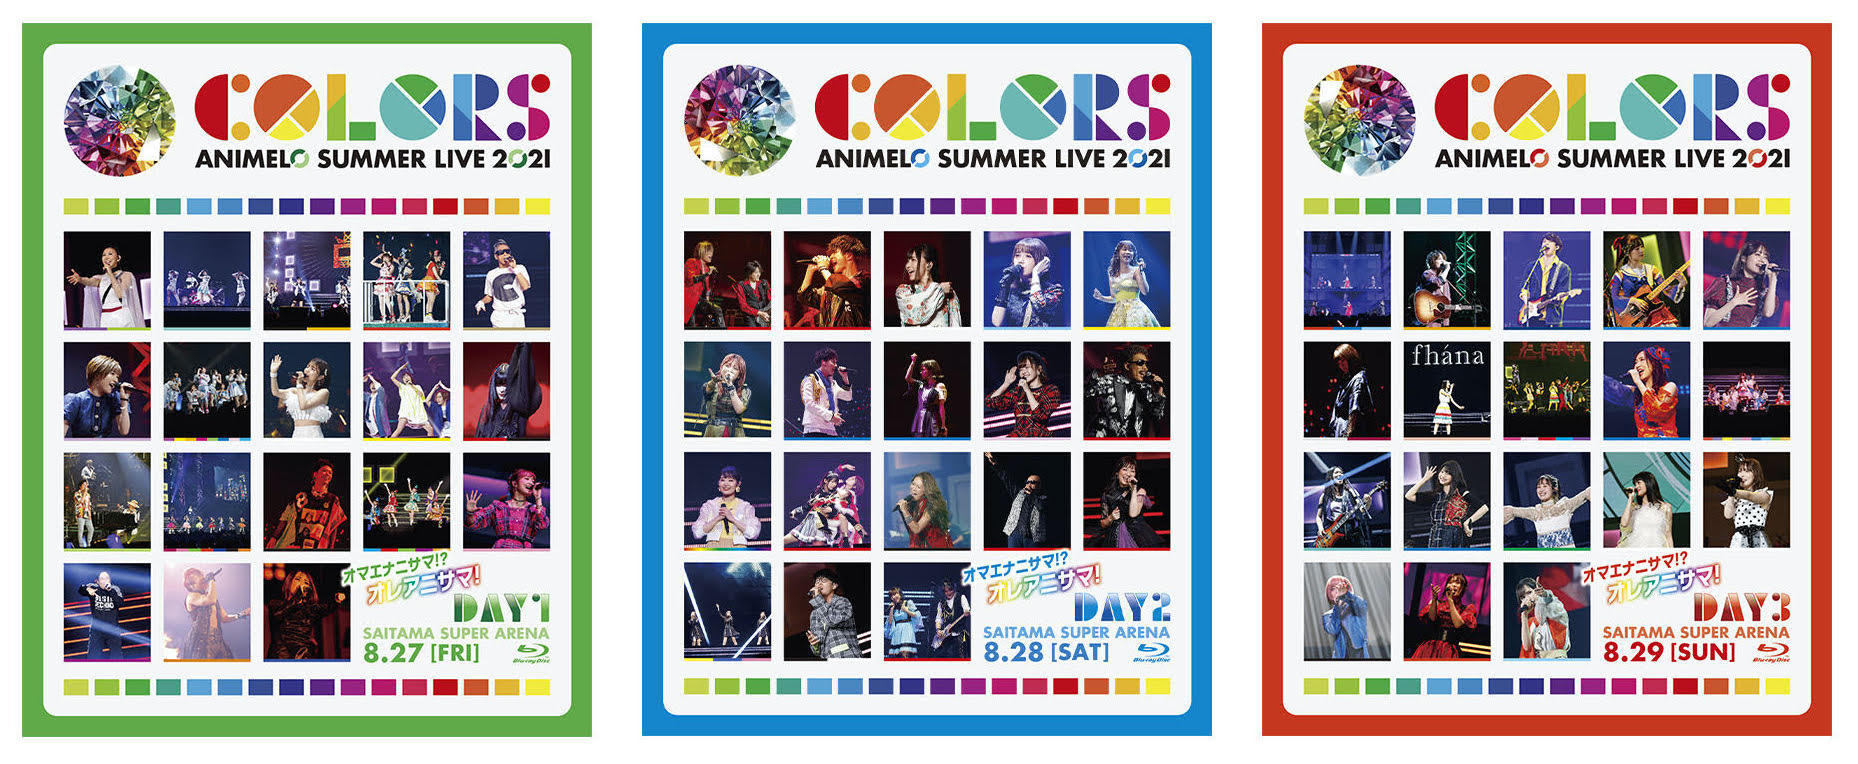 『Animelo Summer Live 2021 –COLORS-』Blu-ray